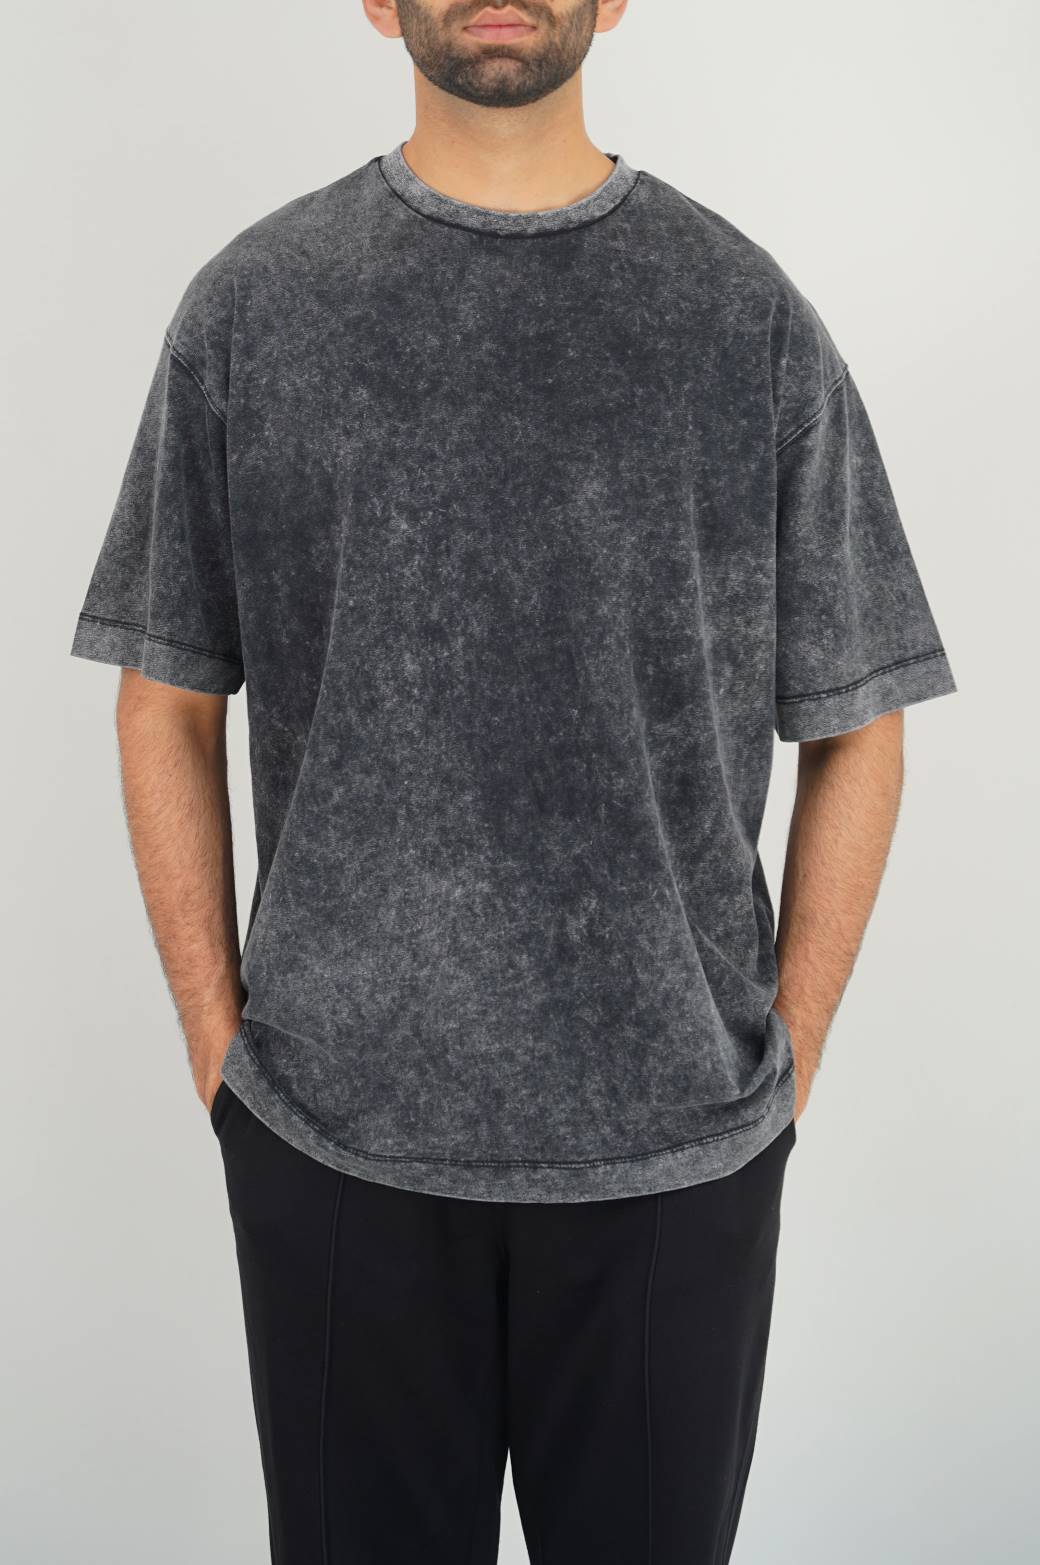 CHARCOAL WASHED LOOSE FIT T SHIRT